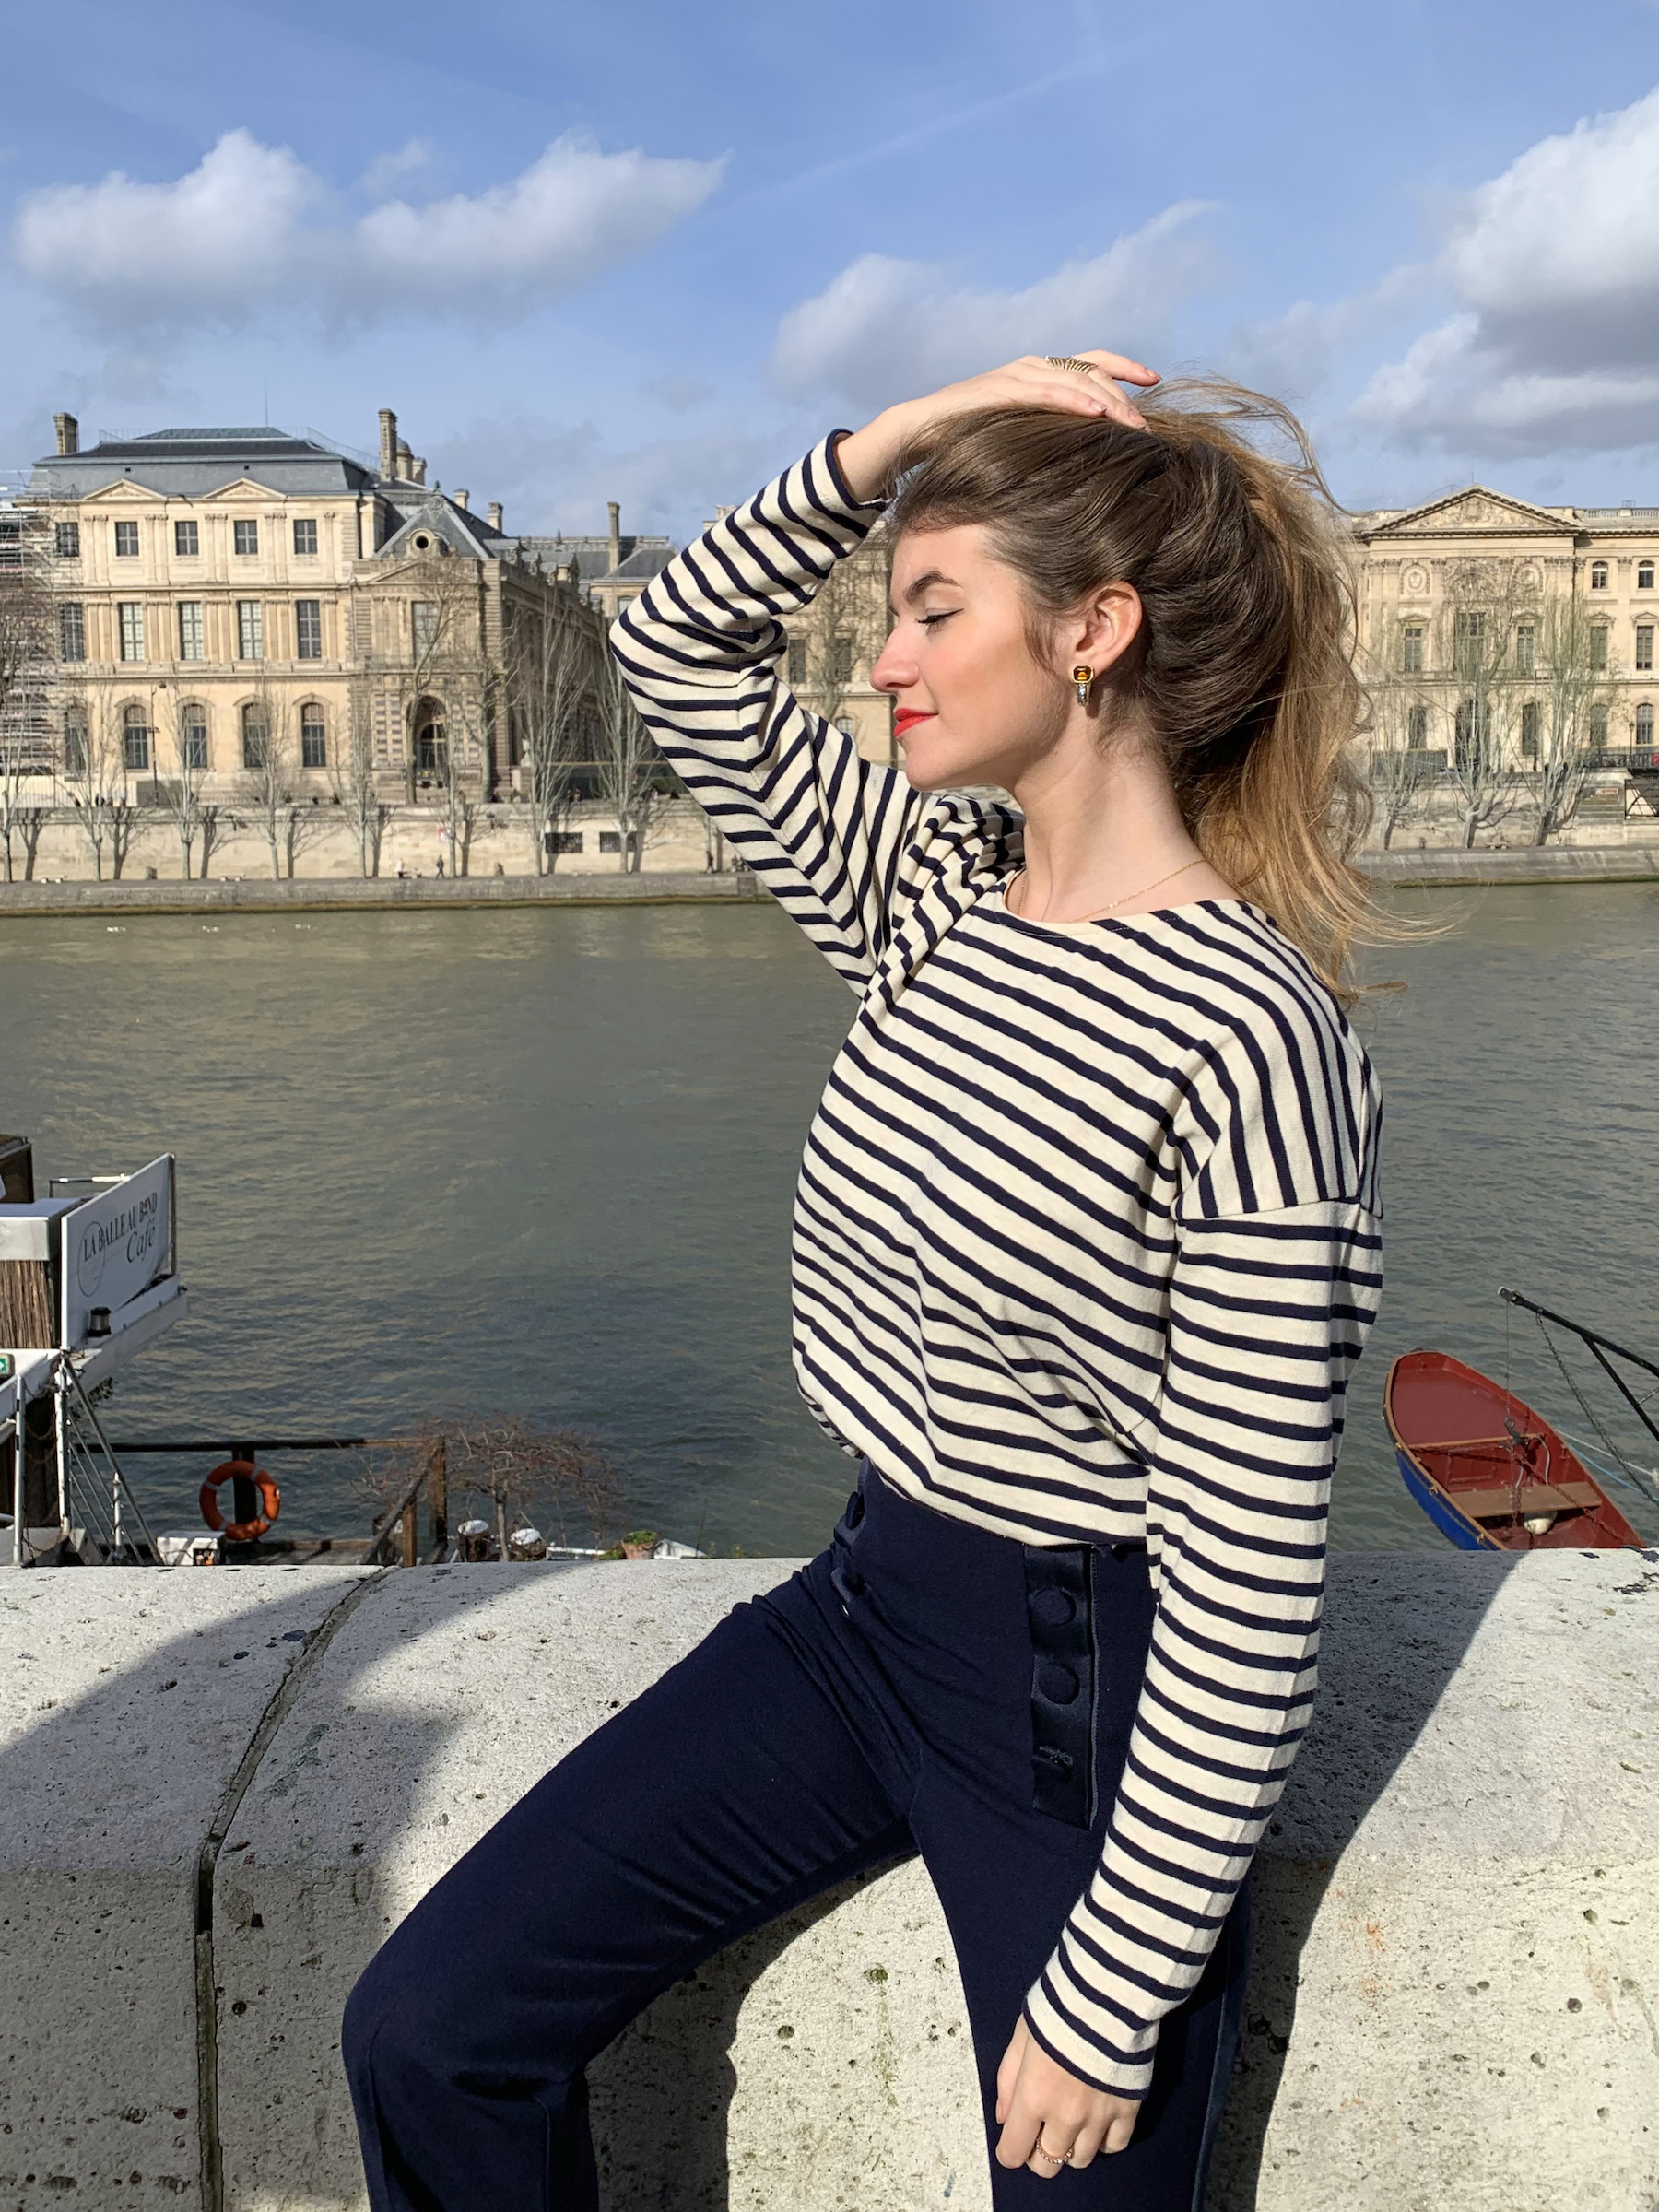 Constance Arnoult wearing a marinière top on the banks of the Seine River